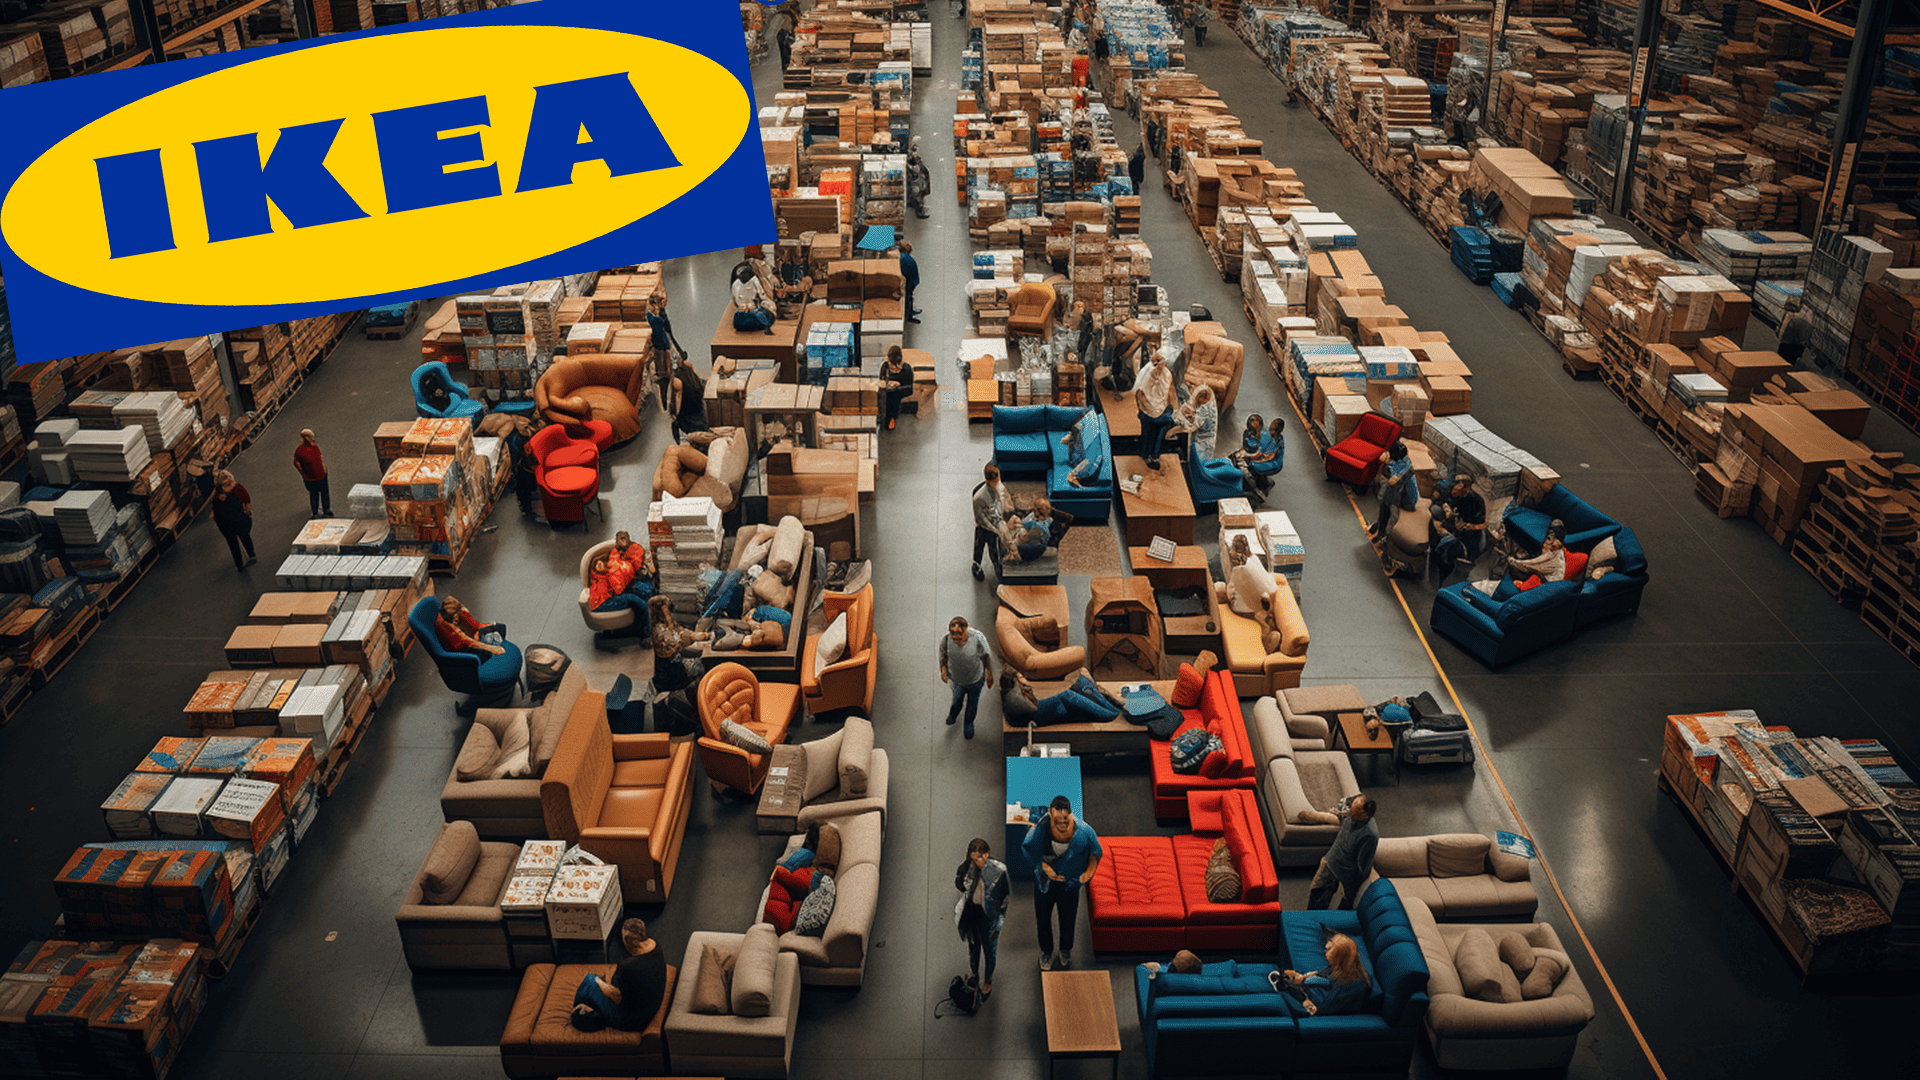 Ikea warehouse overhead view of couches on display in retail setting